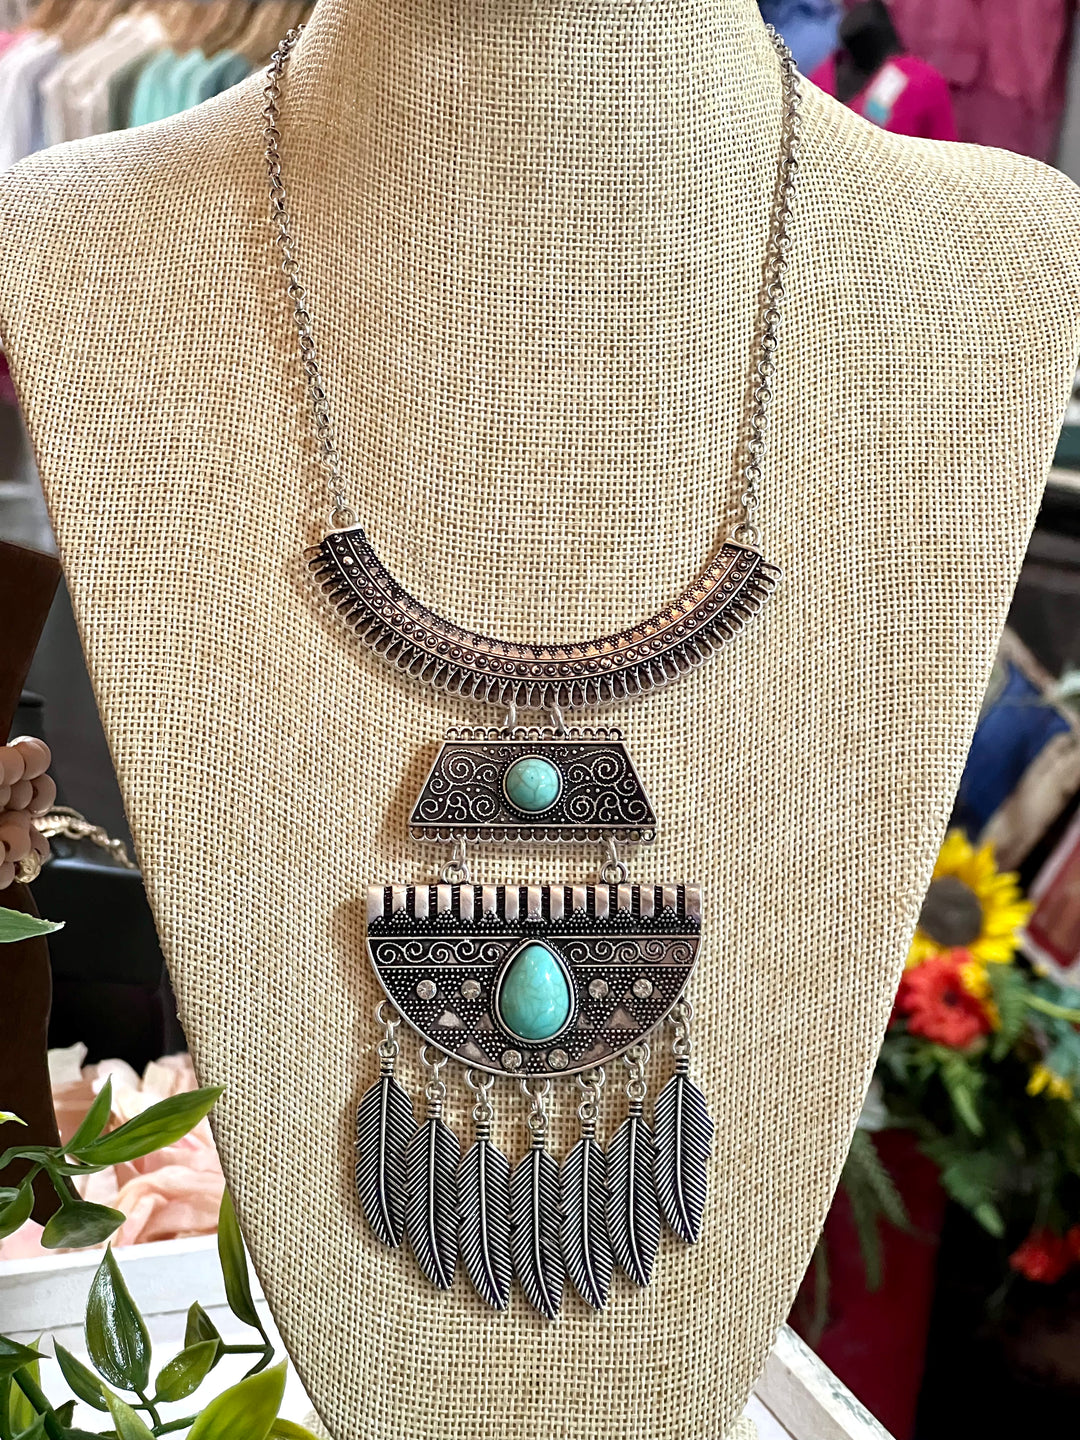 Southwest Style etched Silver w/Feathers Turfquoise Necklace